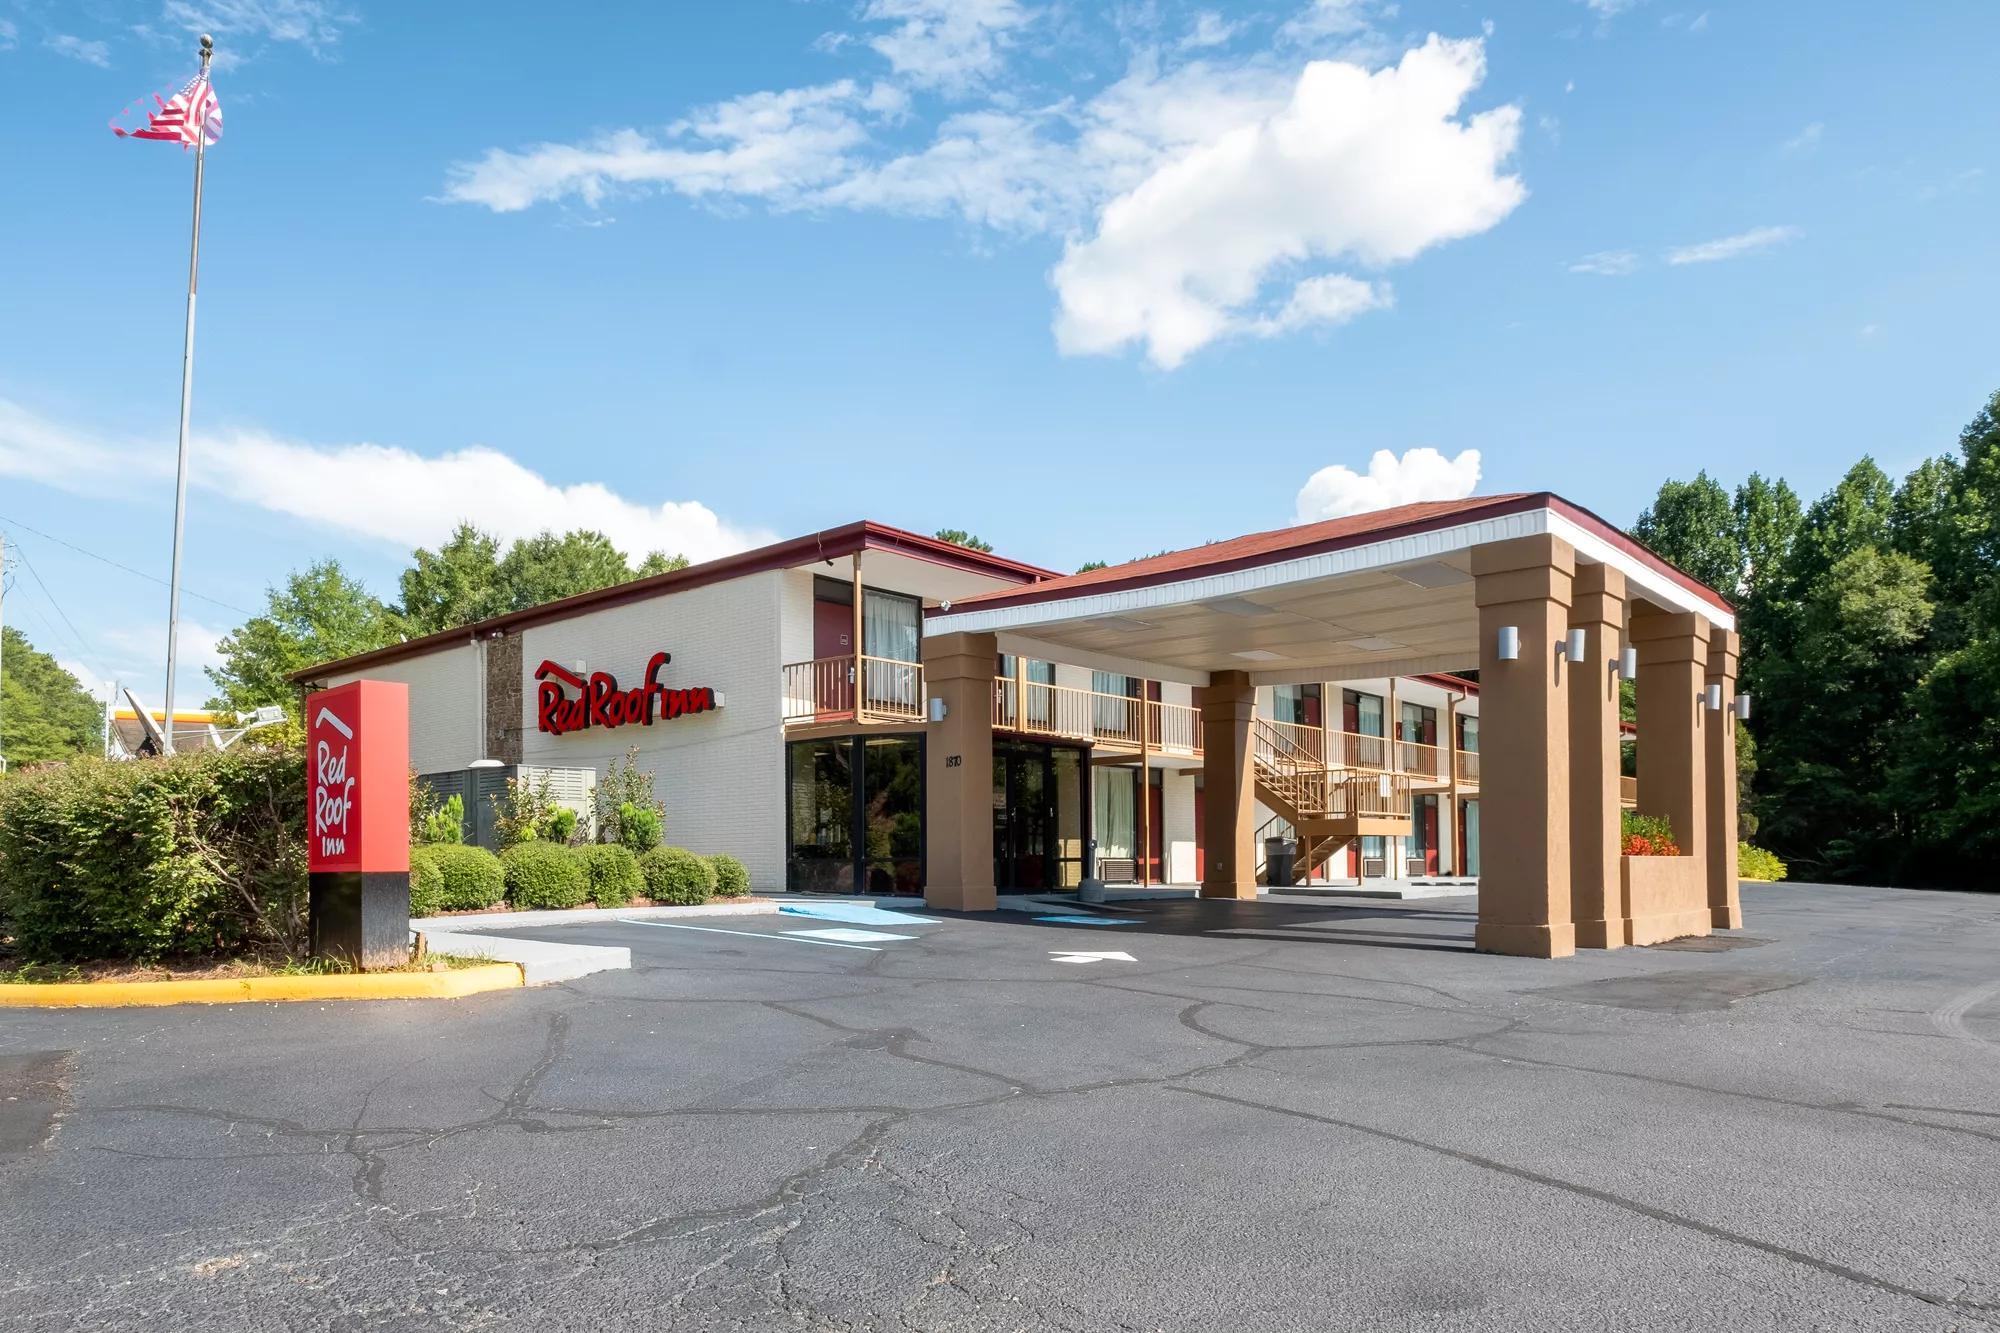 Red Roof Inn West Point Property Exterior Image